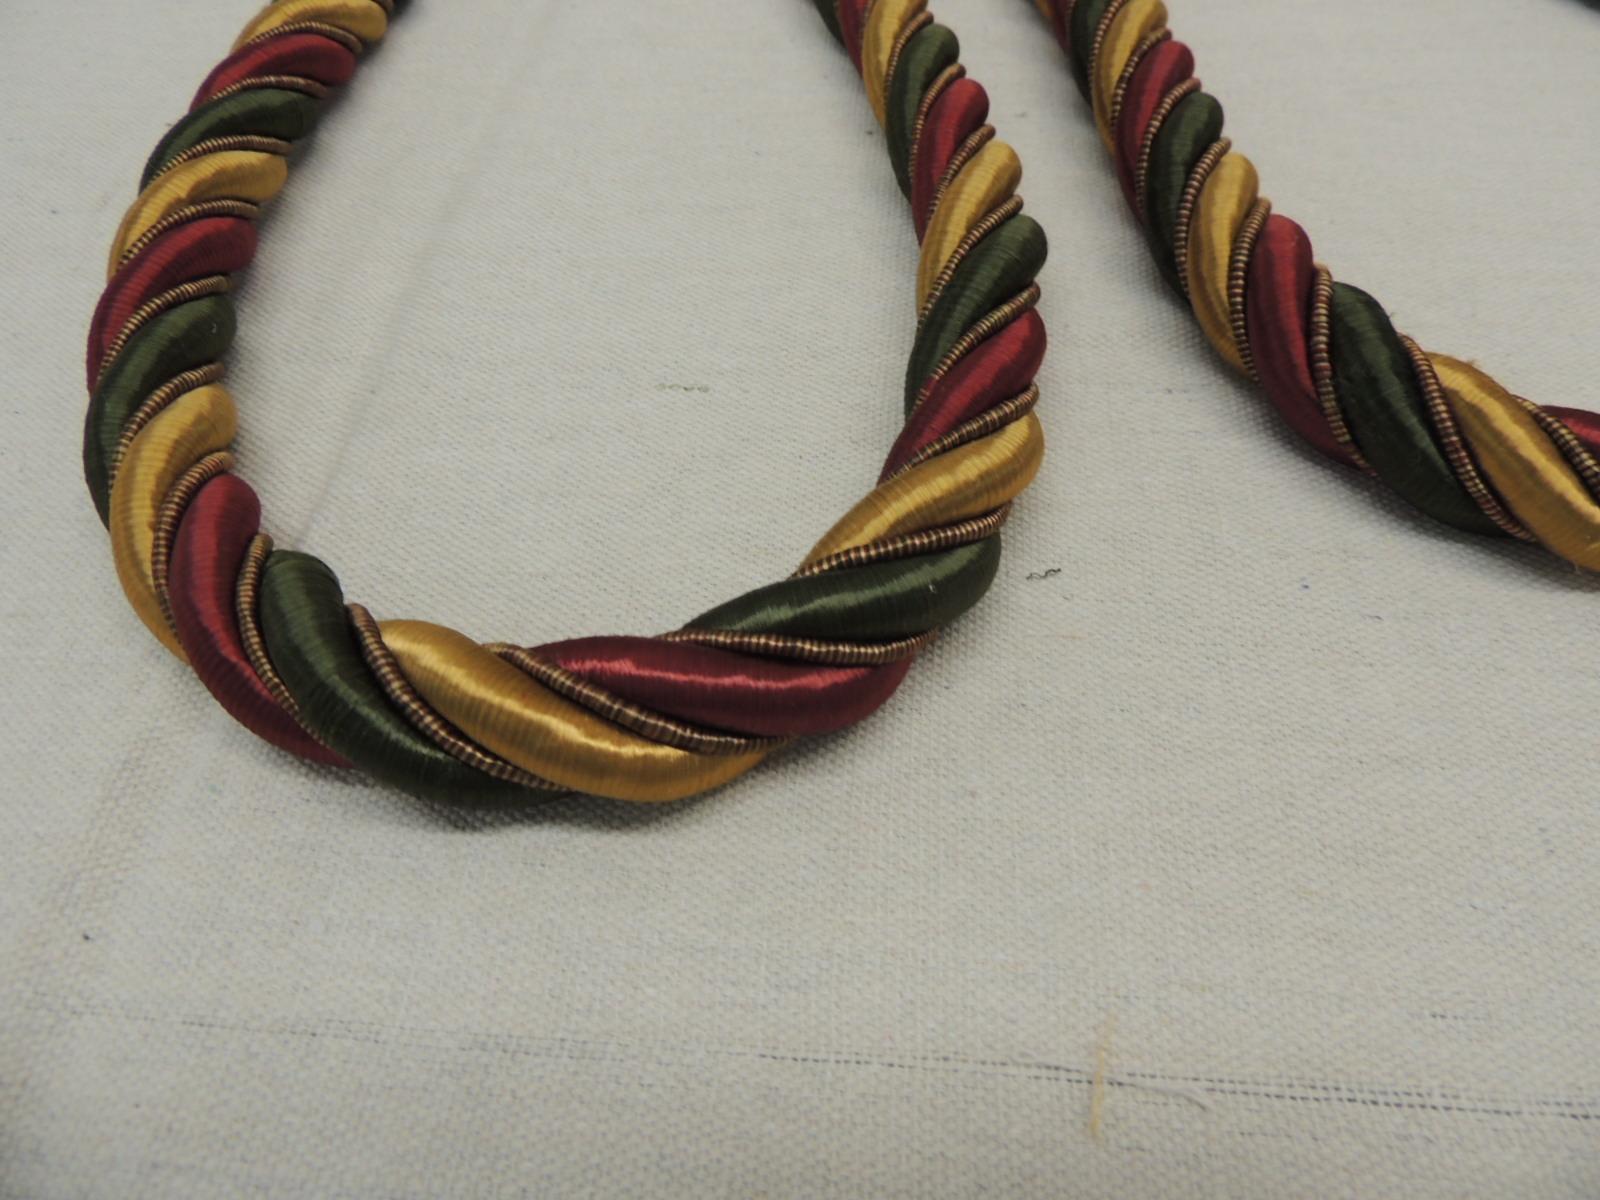 Pair of gold, red and green rope
Curtain holders/tie backs.
Silk curtain tie backs with holding loops
Size: 1” D x 32” L
(4” loops at both ends).
 